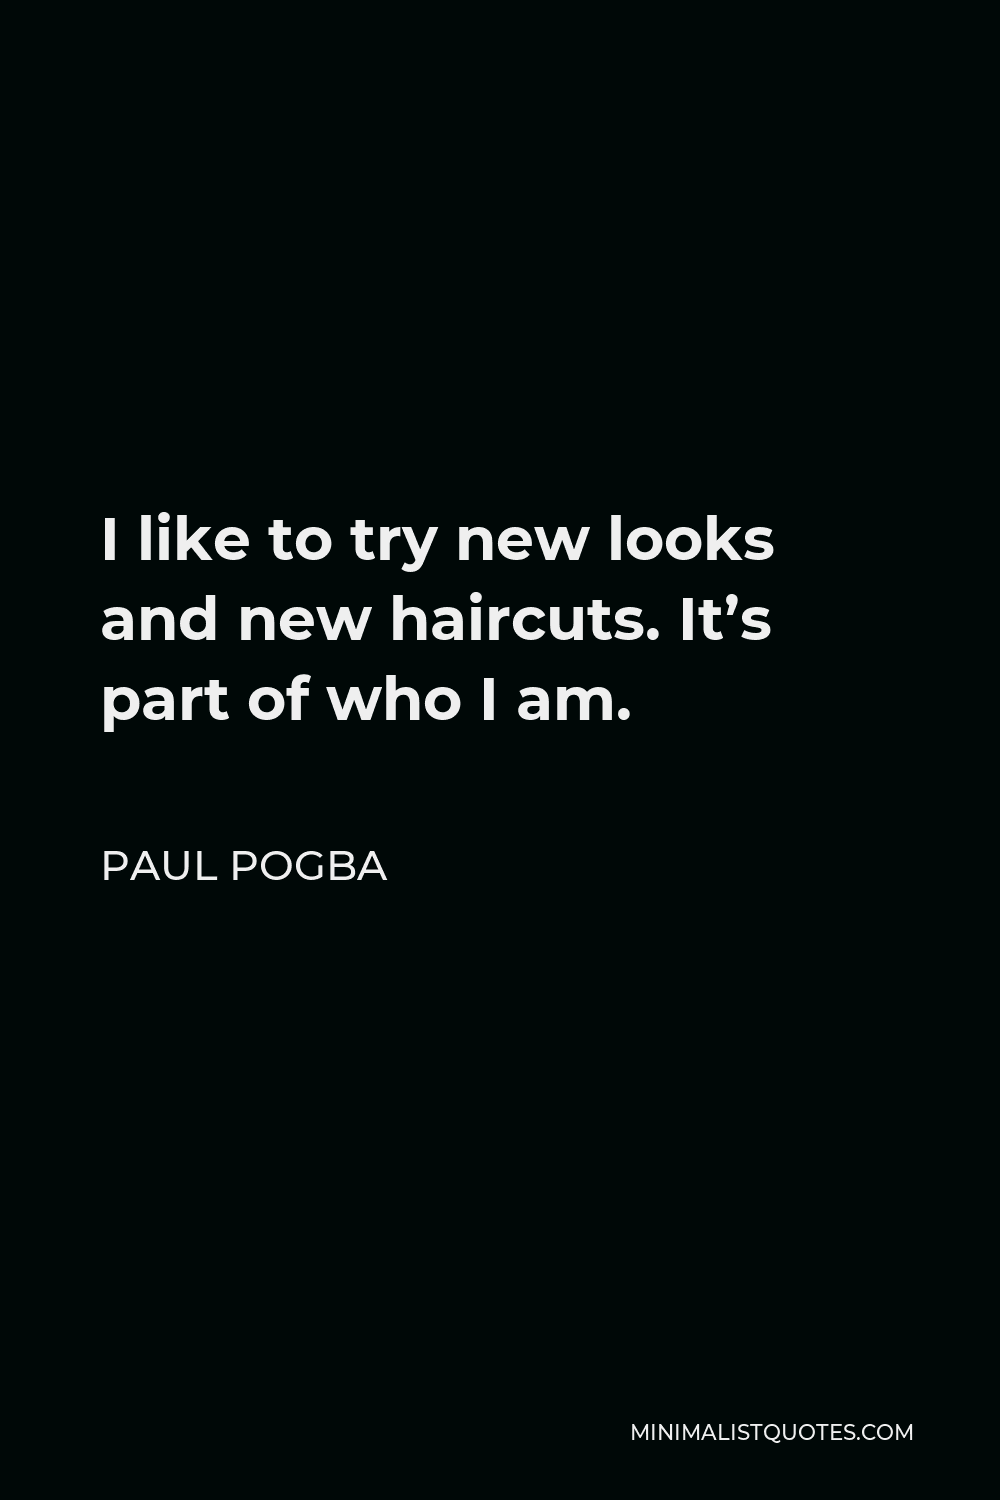 Paul Pogba Quote - I like to try new looks and new haircuts. It’s part of who I am.